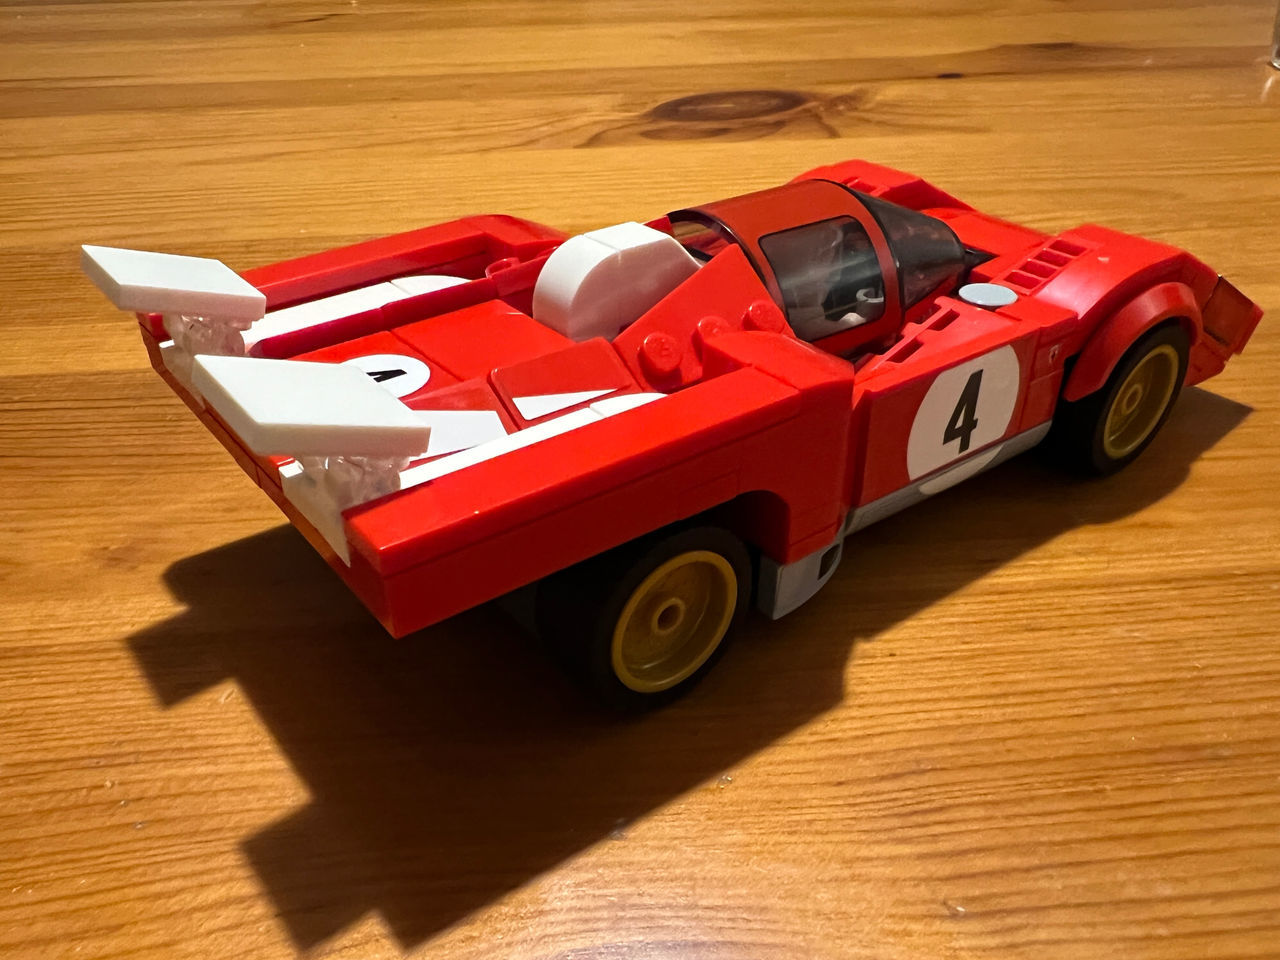 car, vehicle, mode of transportation, transportation, race car, motor vehicle, land vehicle, red, sports car, automobile, toy, model car, sports, wood, high angle view, toy car, speed, childhood, scale model, competition, open-wheel car, auto racing, sports race, driving